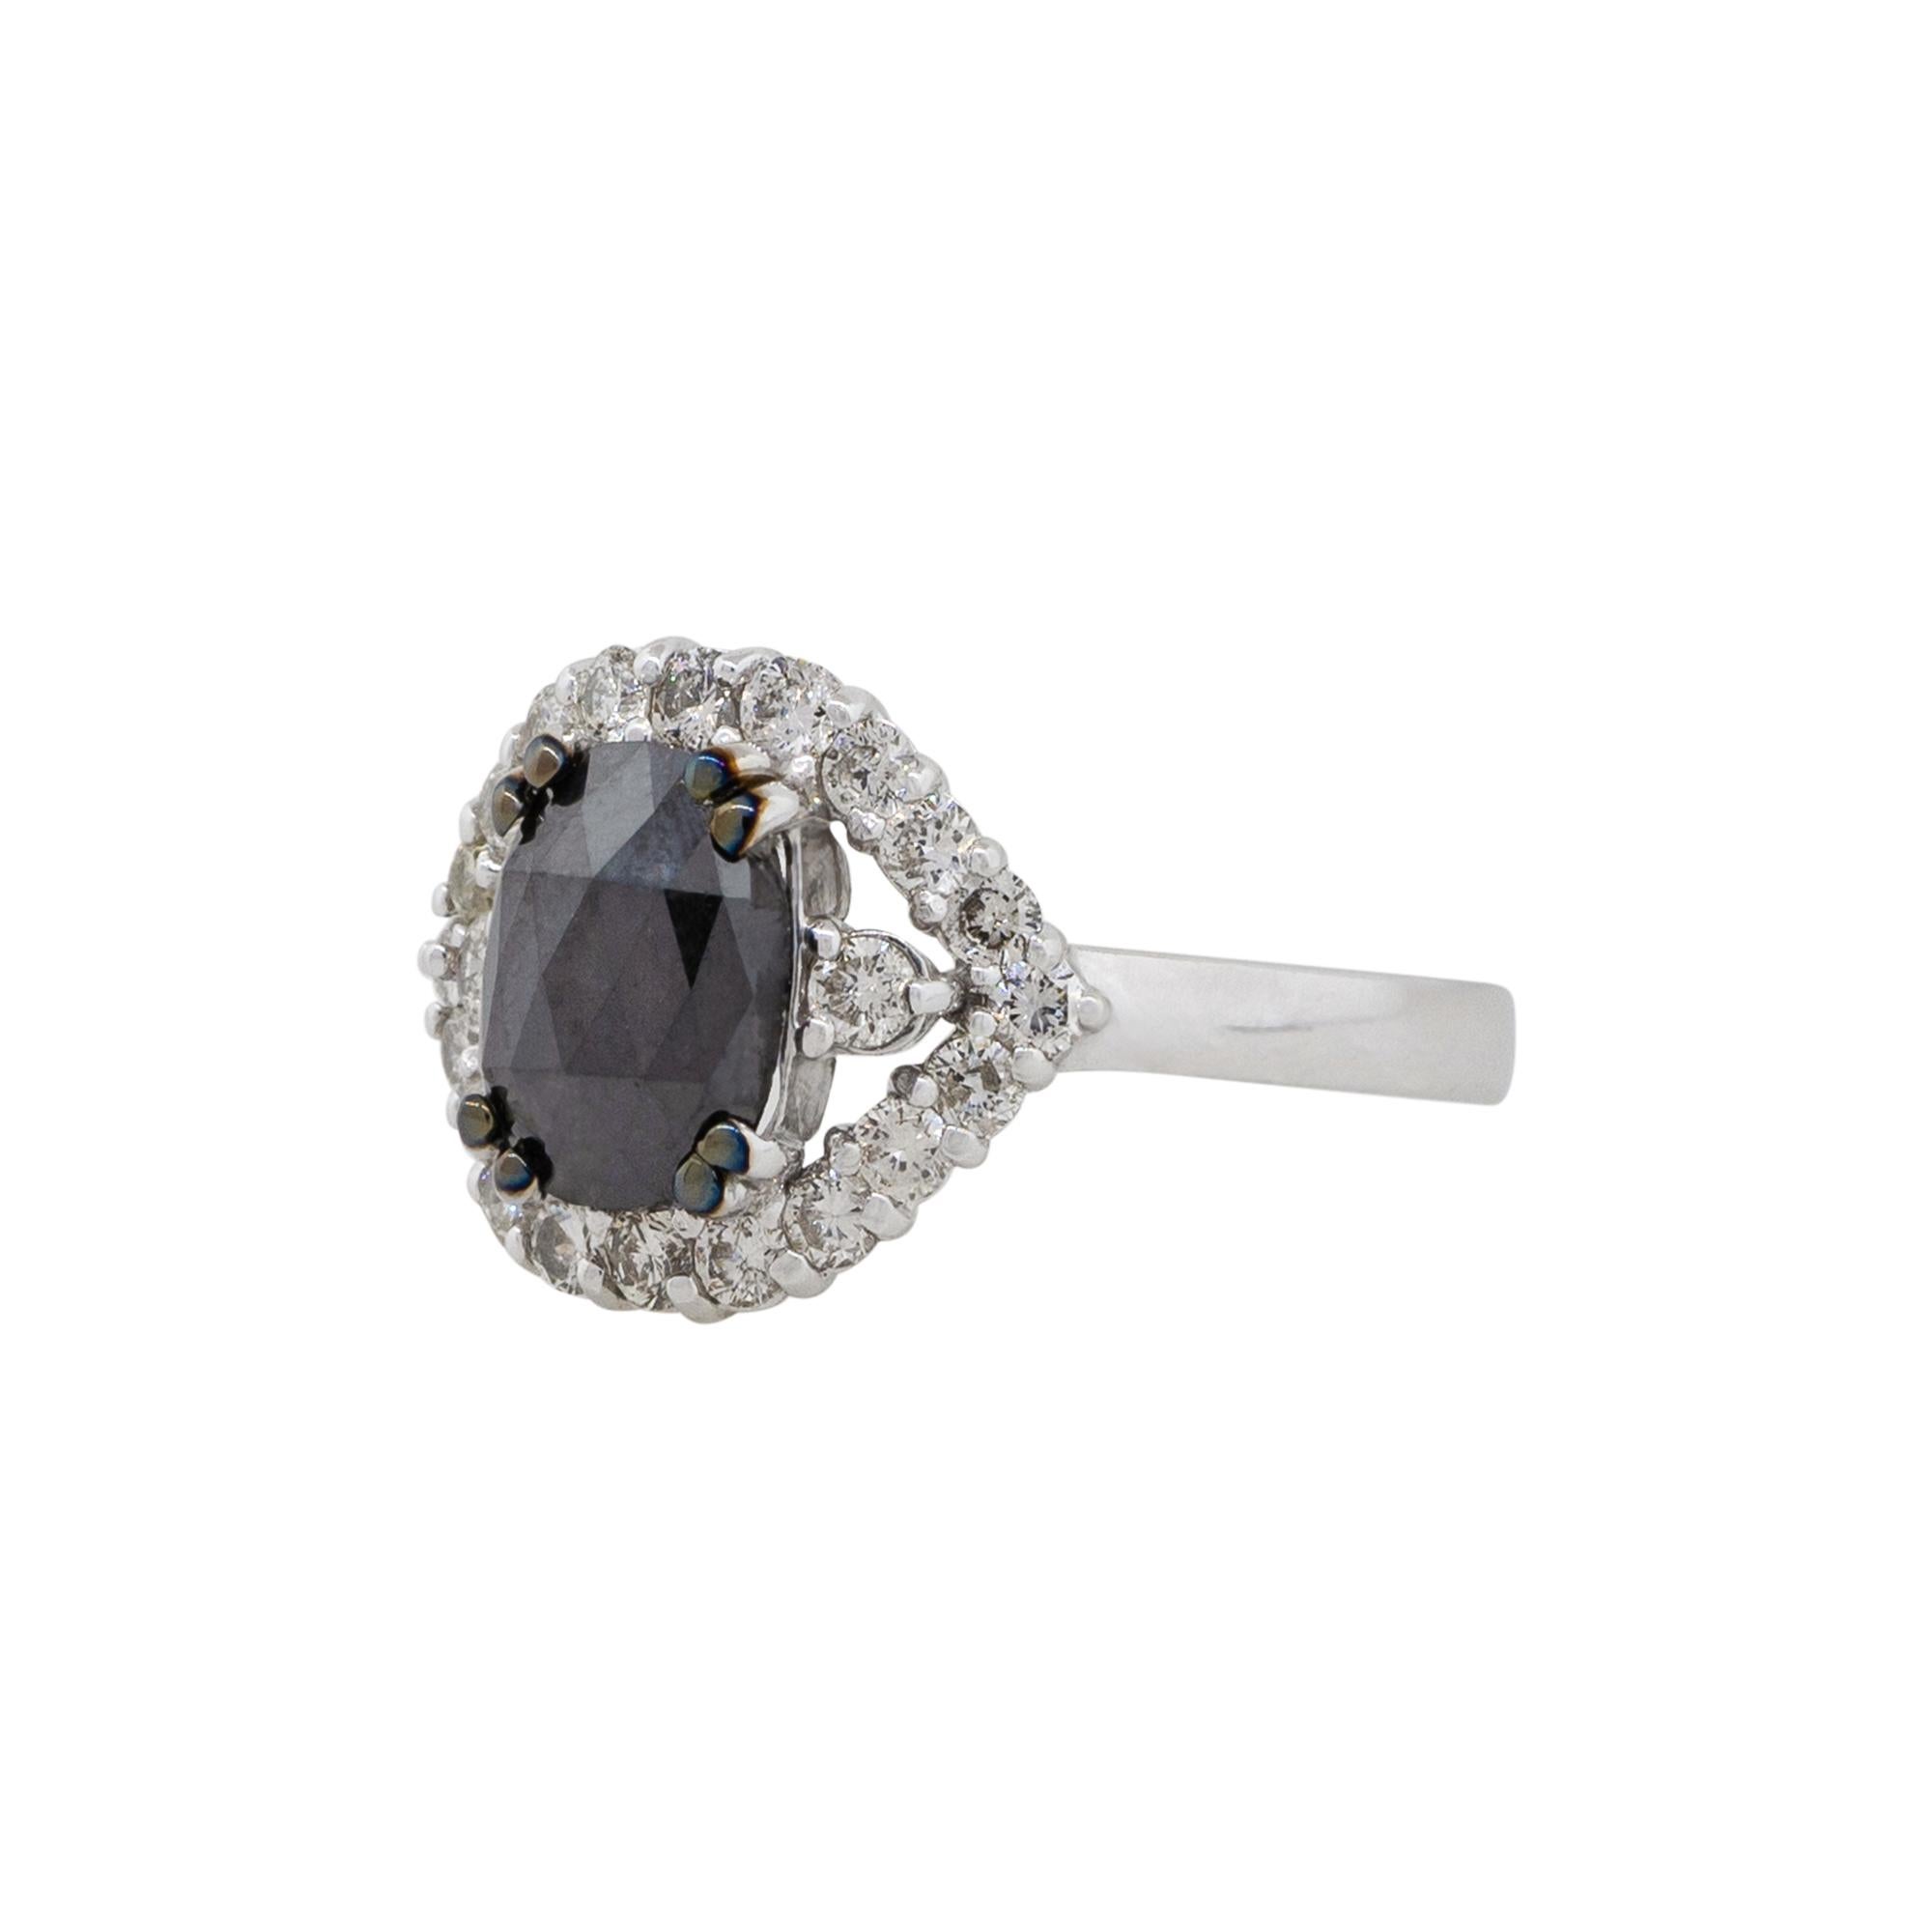 Material: 18k White Gold
Diamond details: Approx. 1.48ctw cushion shaped Diamond. Diamond is Fancy Black in color and VS in clarity
                             Approx. 0.73ctw of round cut Diamonds. Diamonds are H in color and VS in clarity
Size: